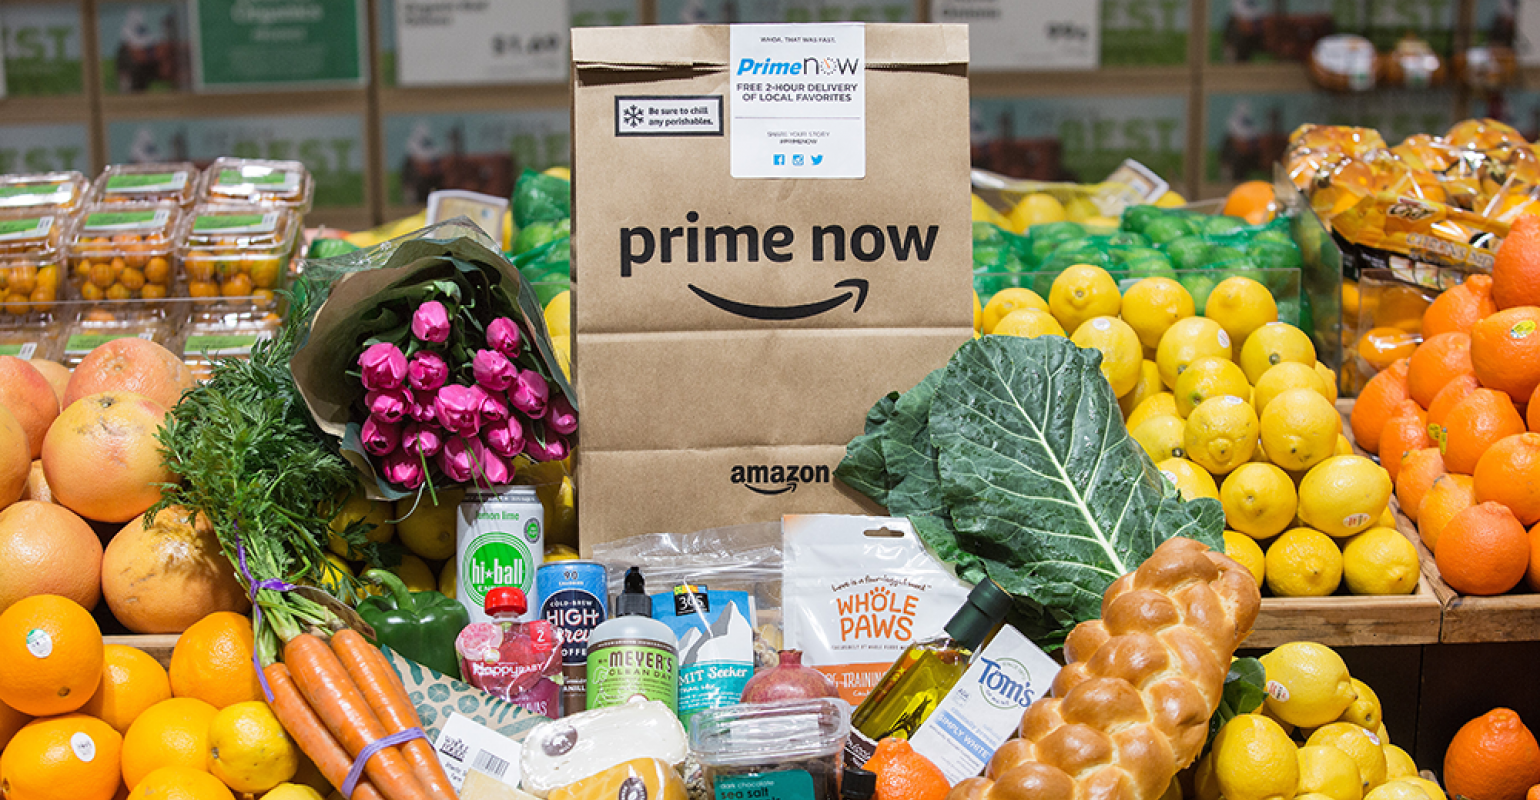 Amazon Whole Foods Extend Prime Now Delivery Supermarket News